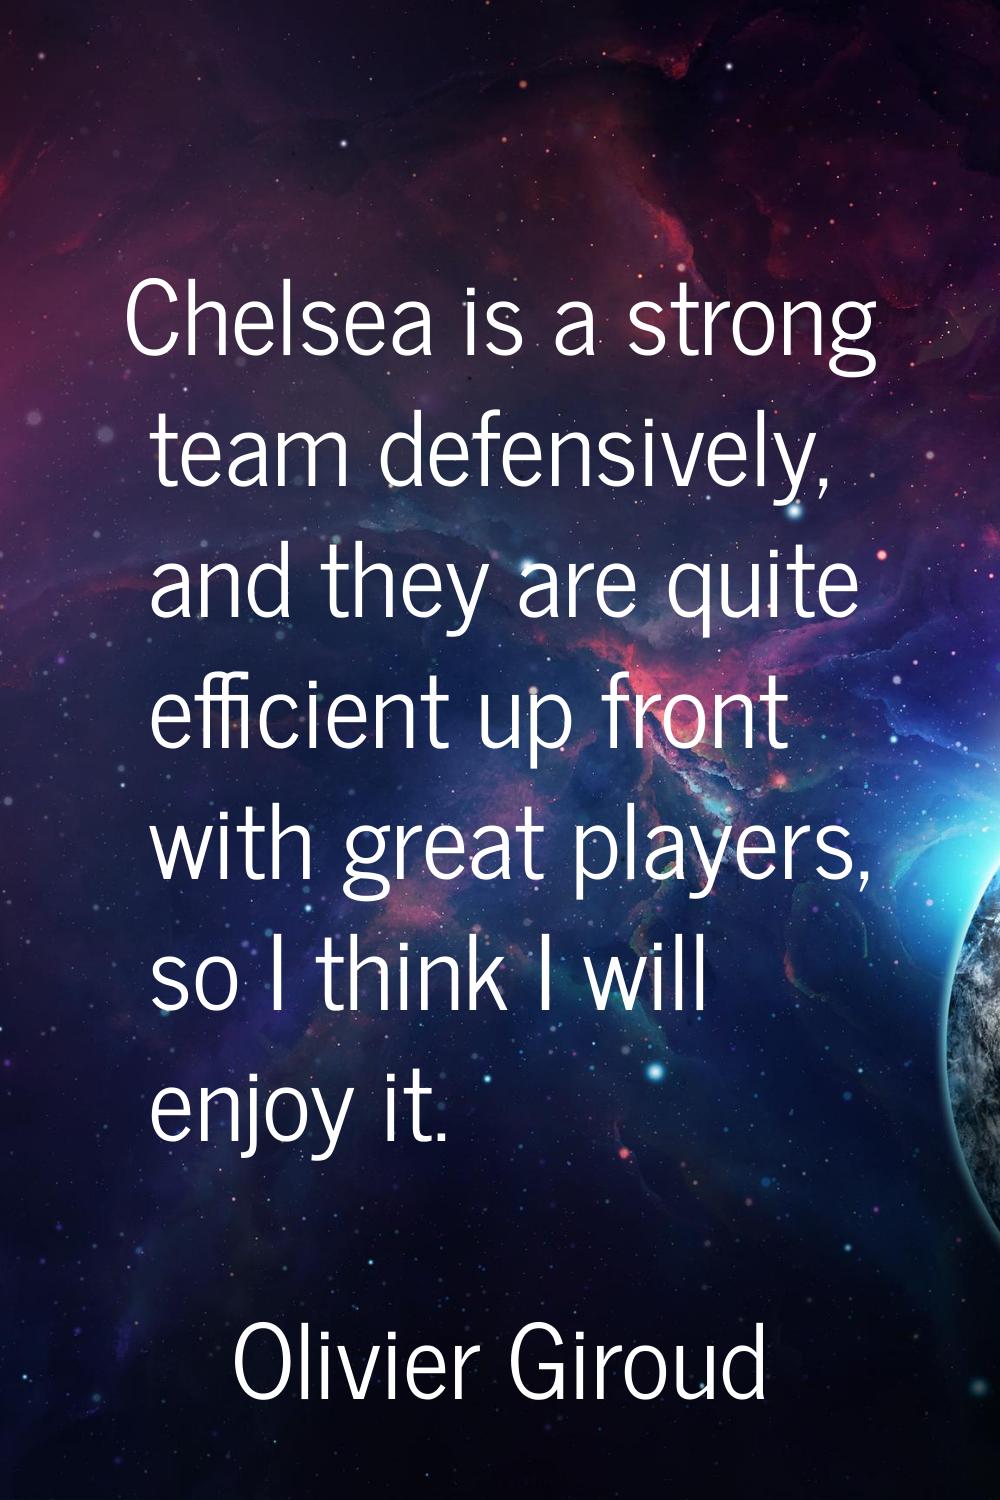 Chelsea is a strong team defensively, and they are quite efficient up front with great players, so 